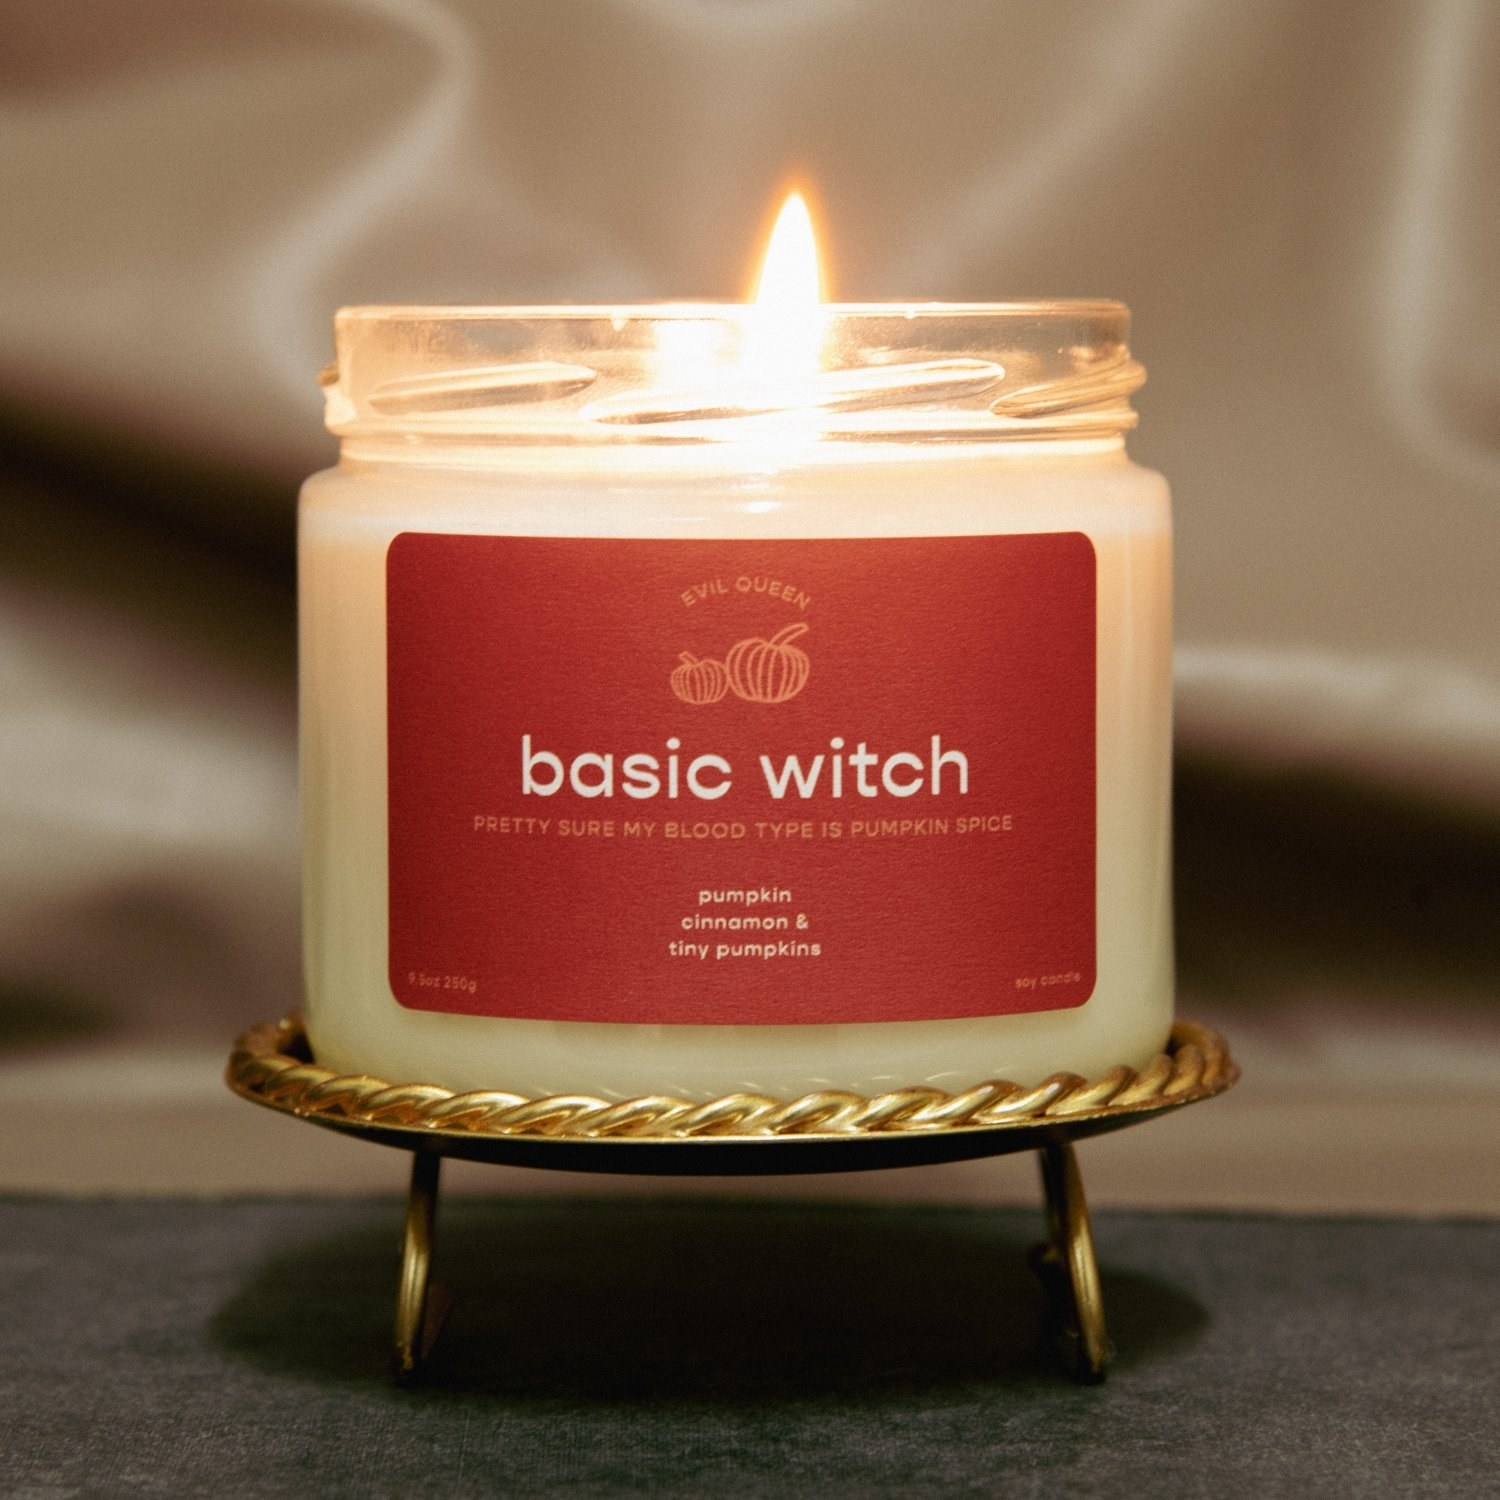 a candle with an orange label on it that says &quot;basic witch, pretty sure my blood type is pumpkin spice&quot;